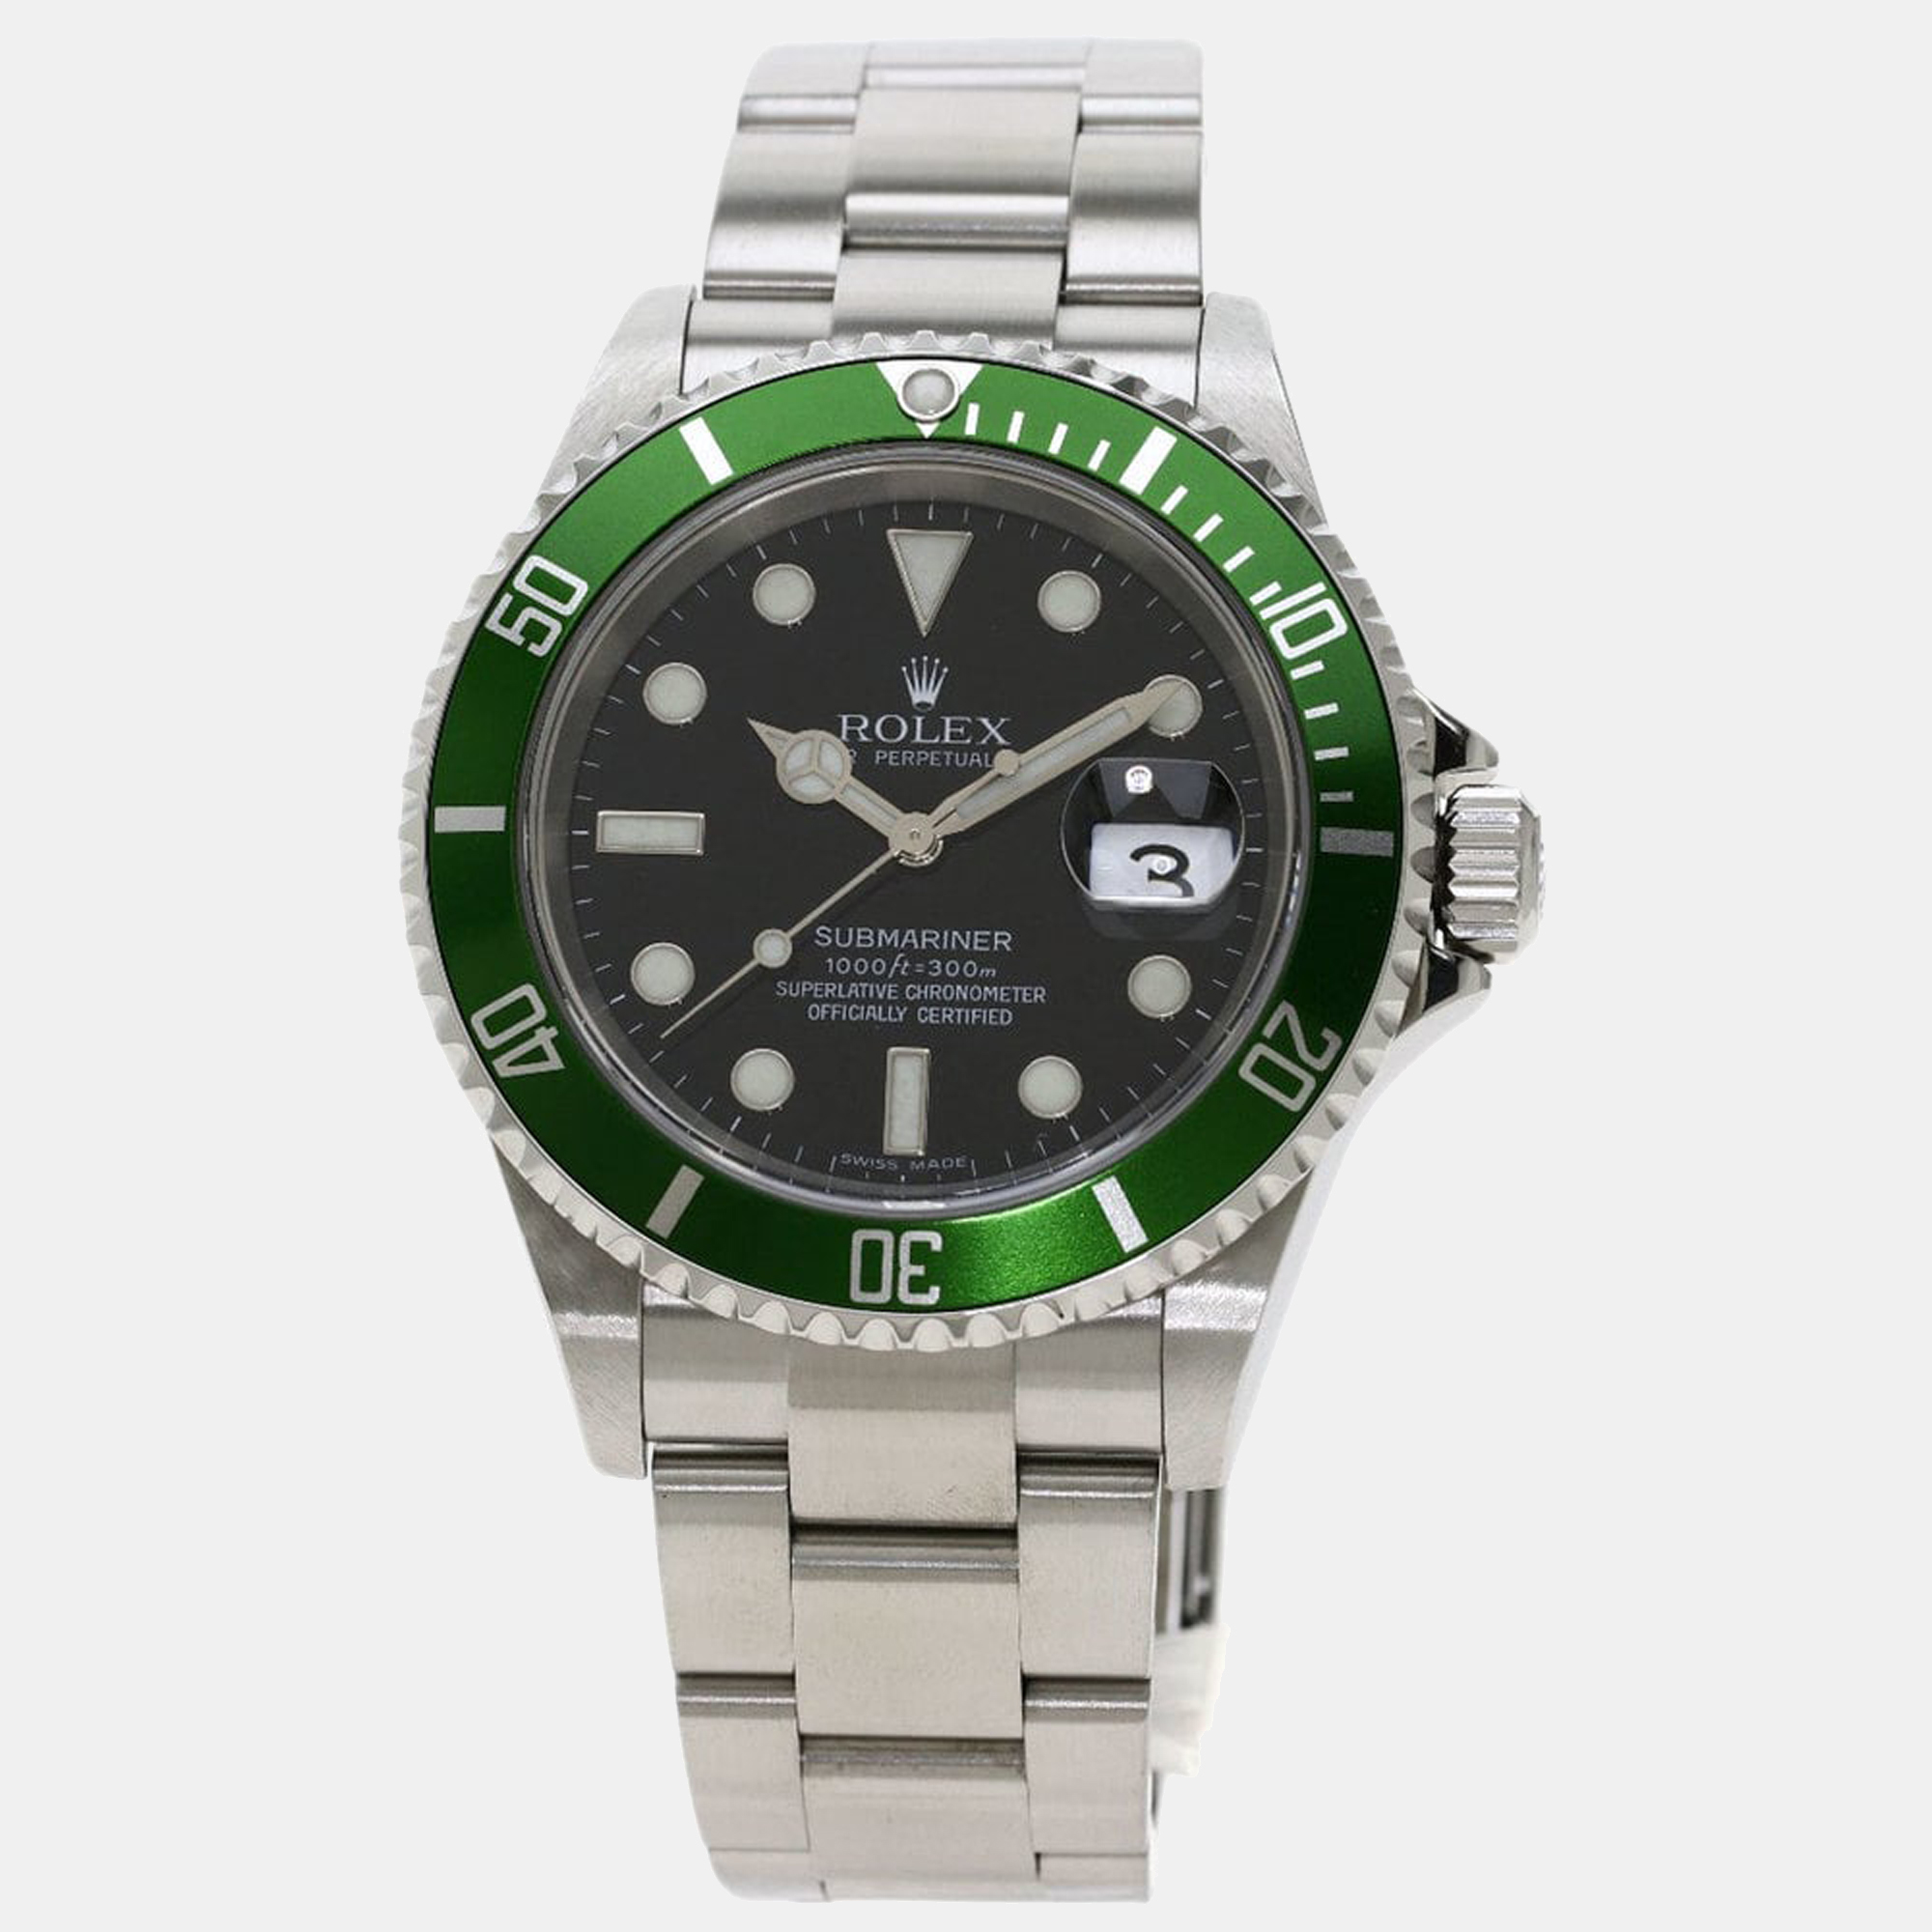 Pre-owned Rolex Black Stainless Steel Submariner 16610lv Men's Wristwatch 40 Mm